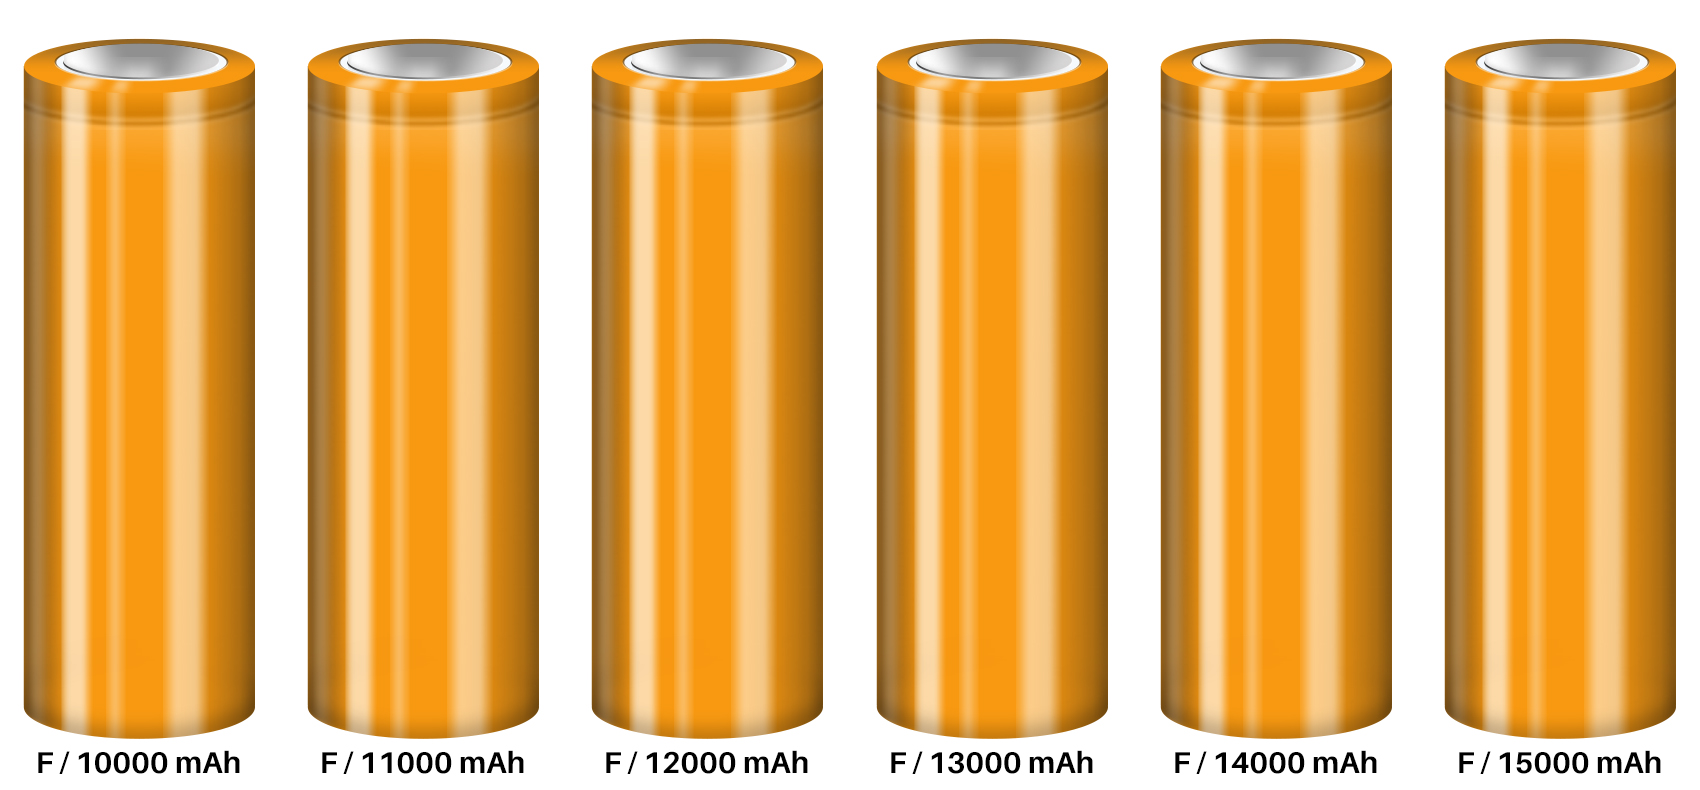 F NiMH battery with different Capacities